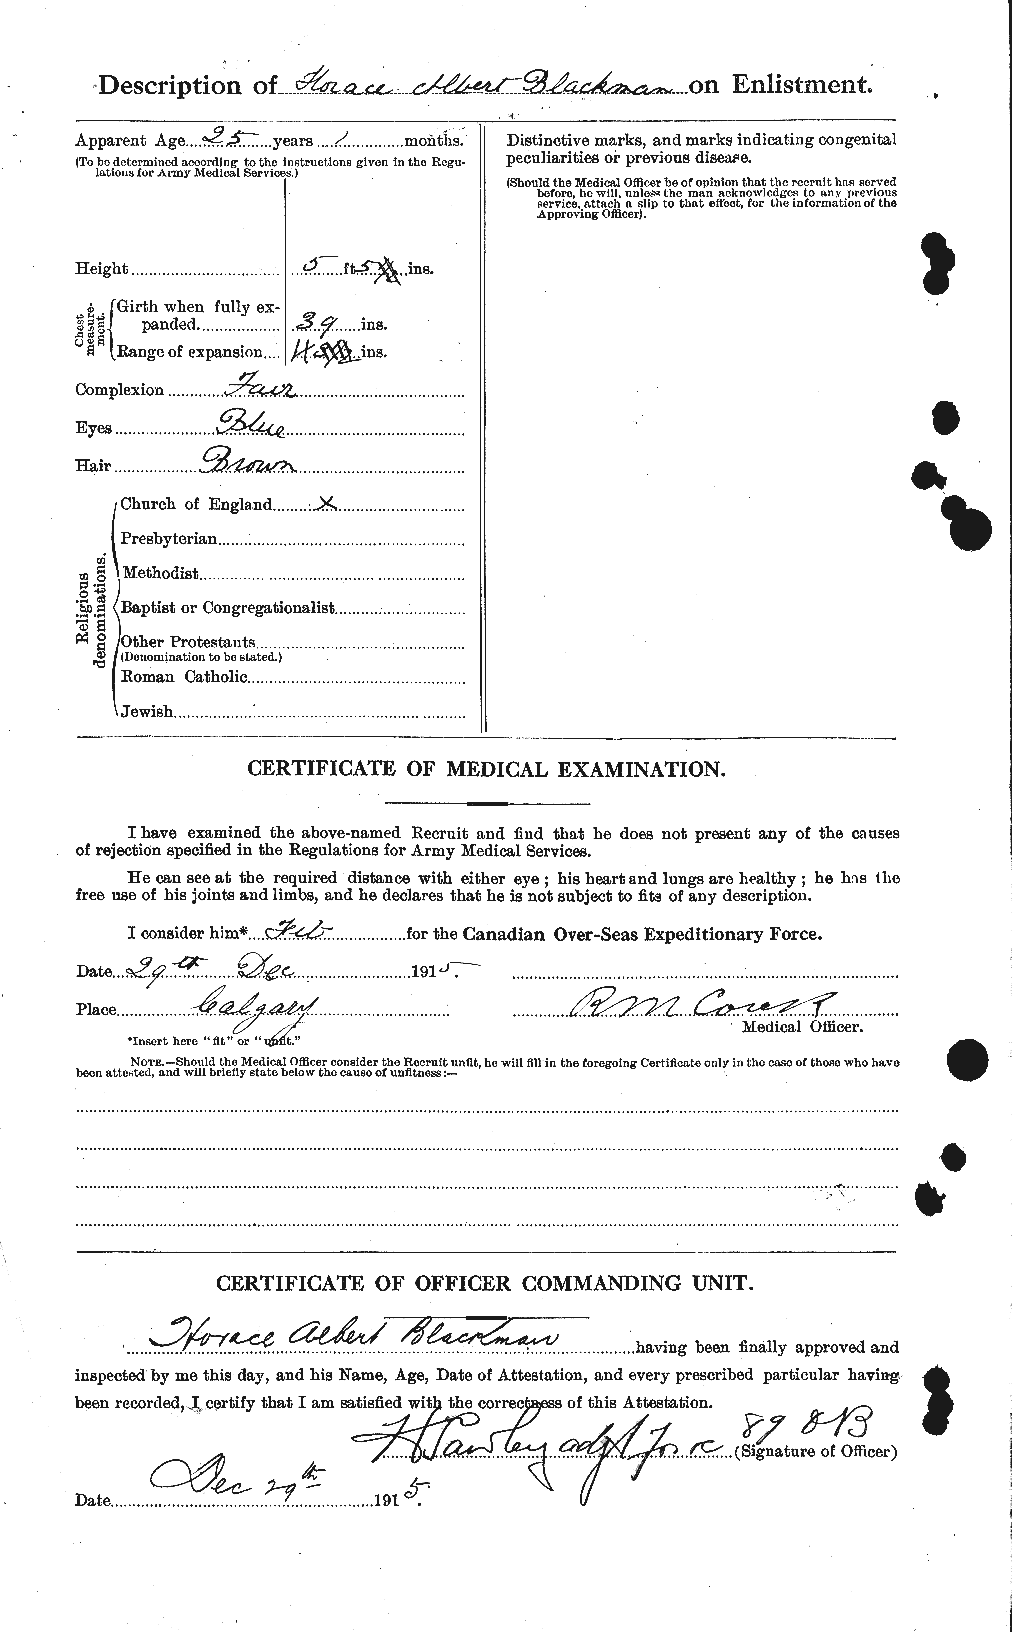 Personnel Records of the First World War - CEF 248319b